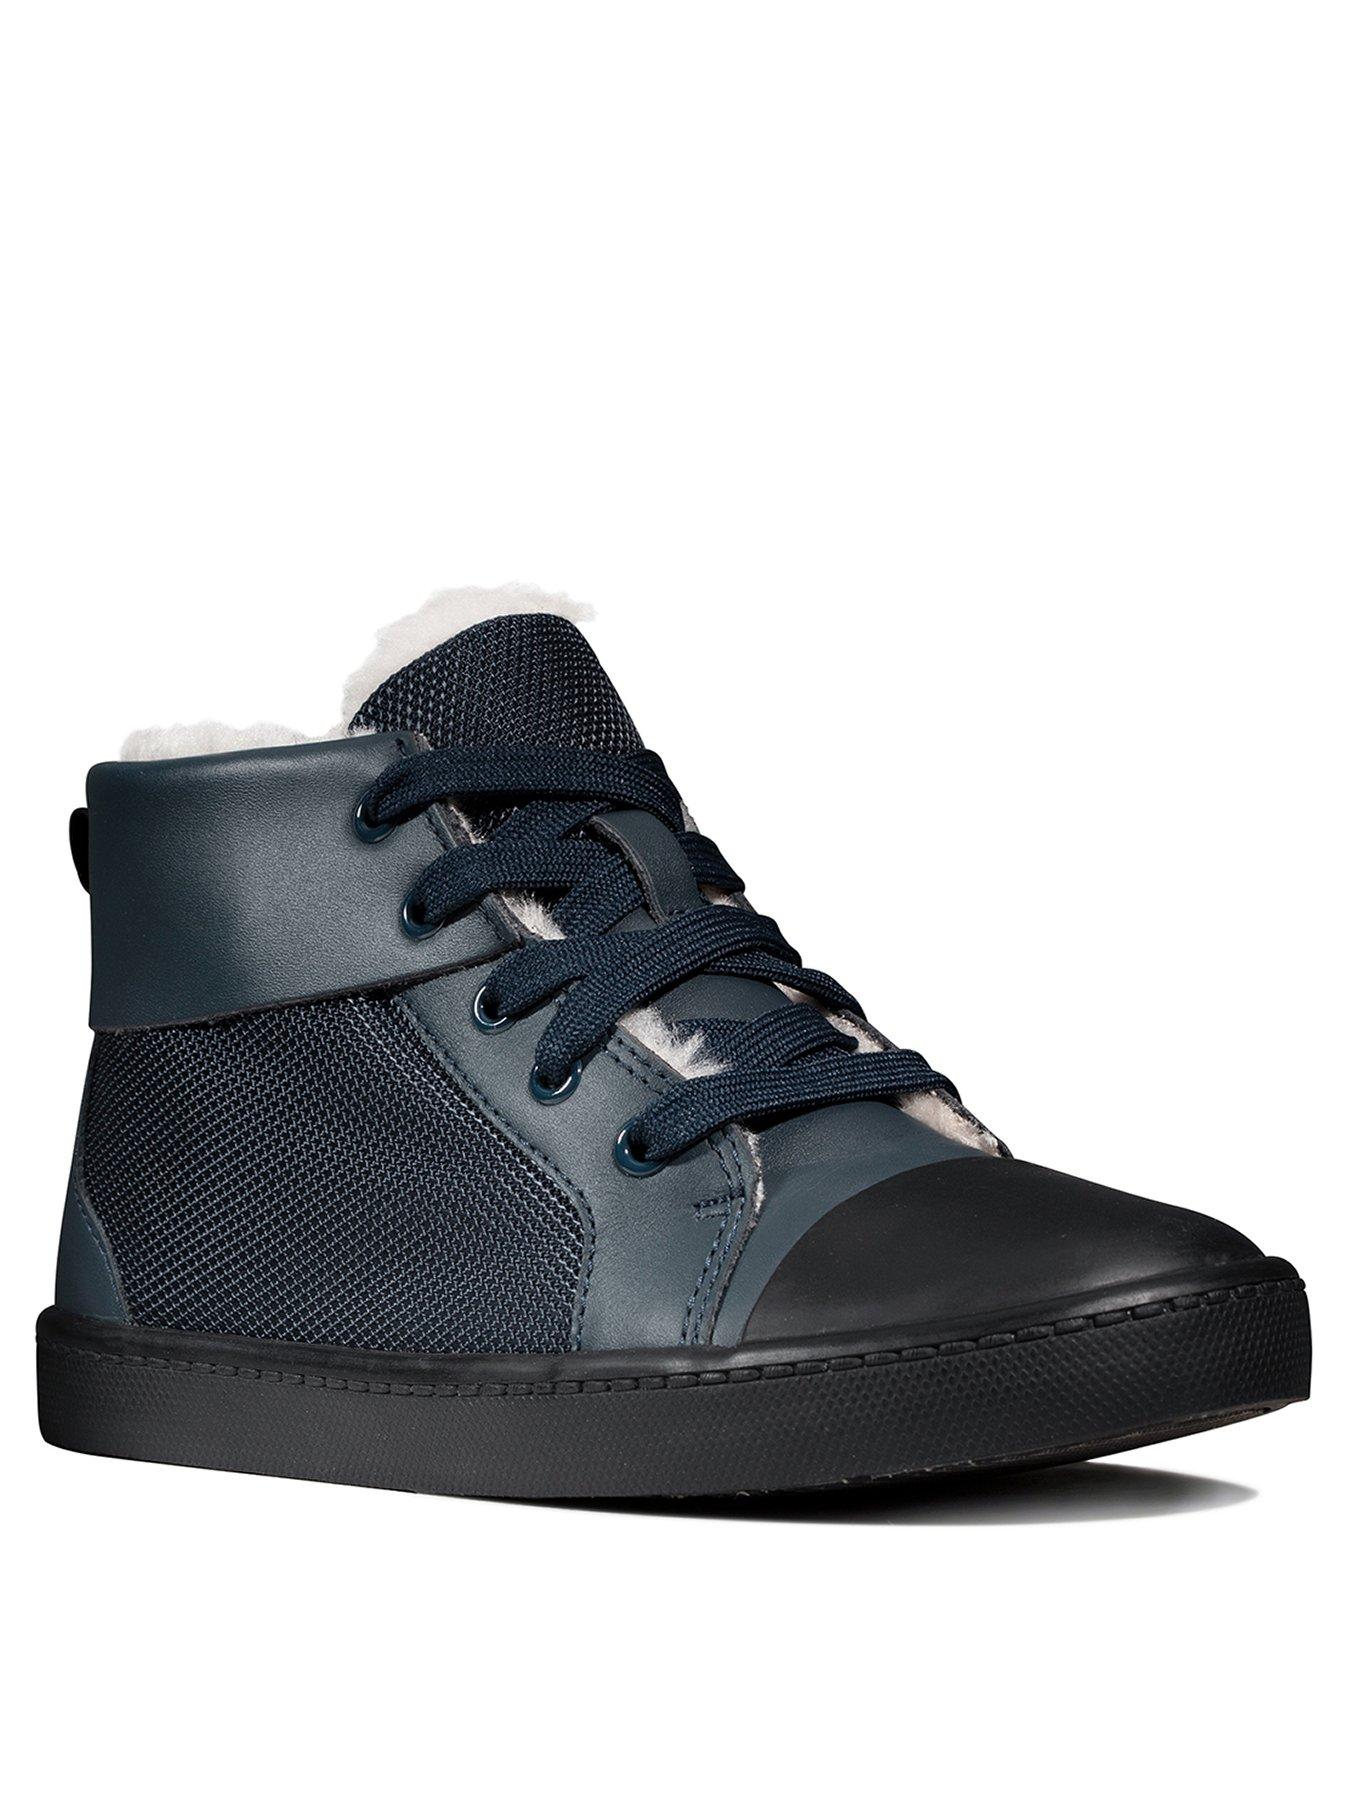 clarks high top shoes